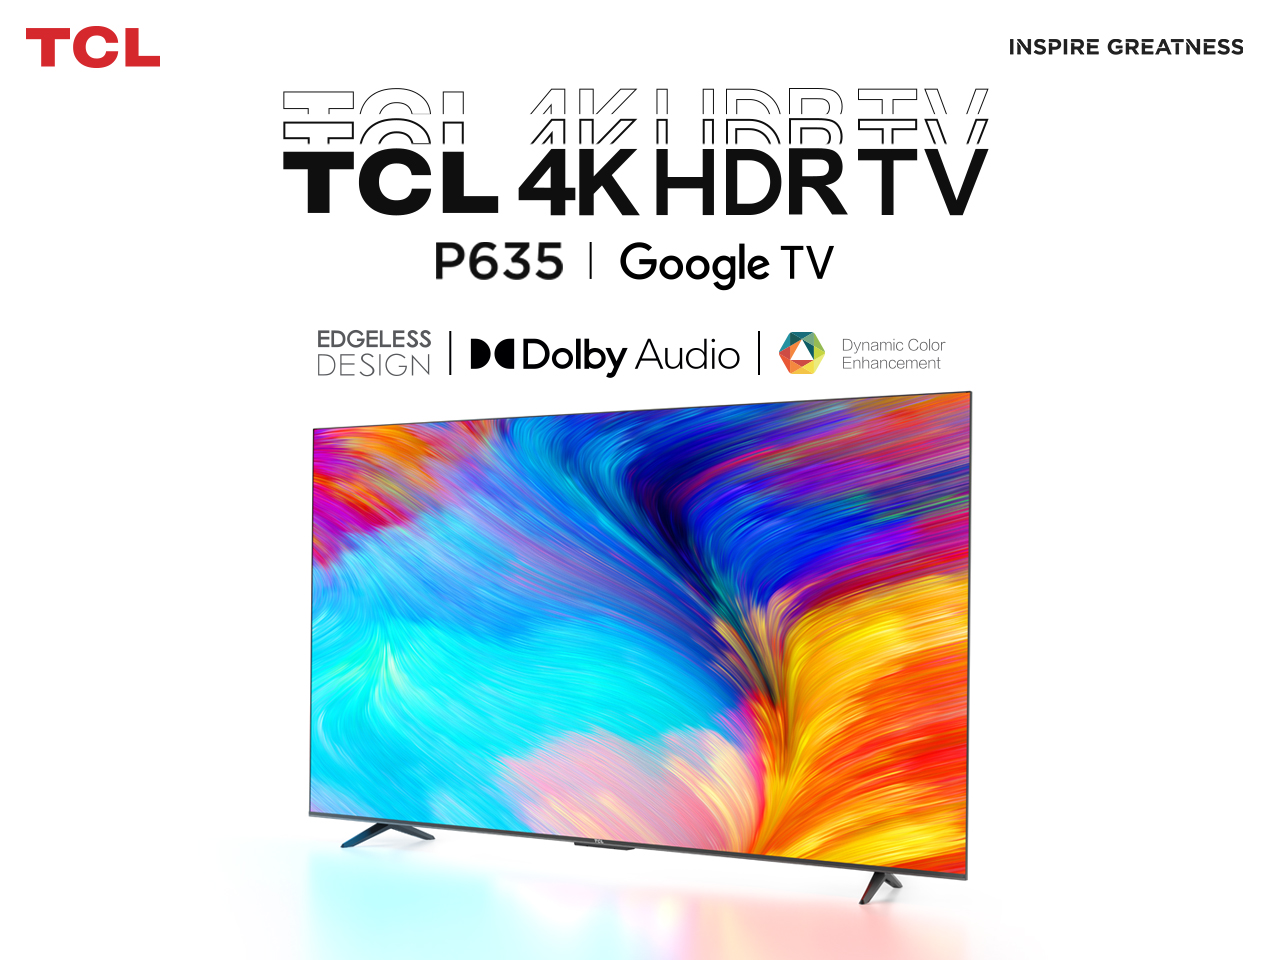 TCL P635 - The Must-Have Smart TV for Your Home Entertainment 